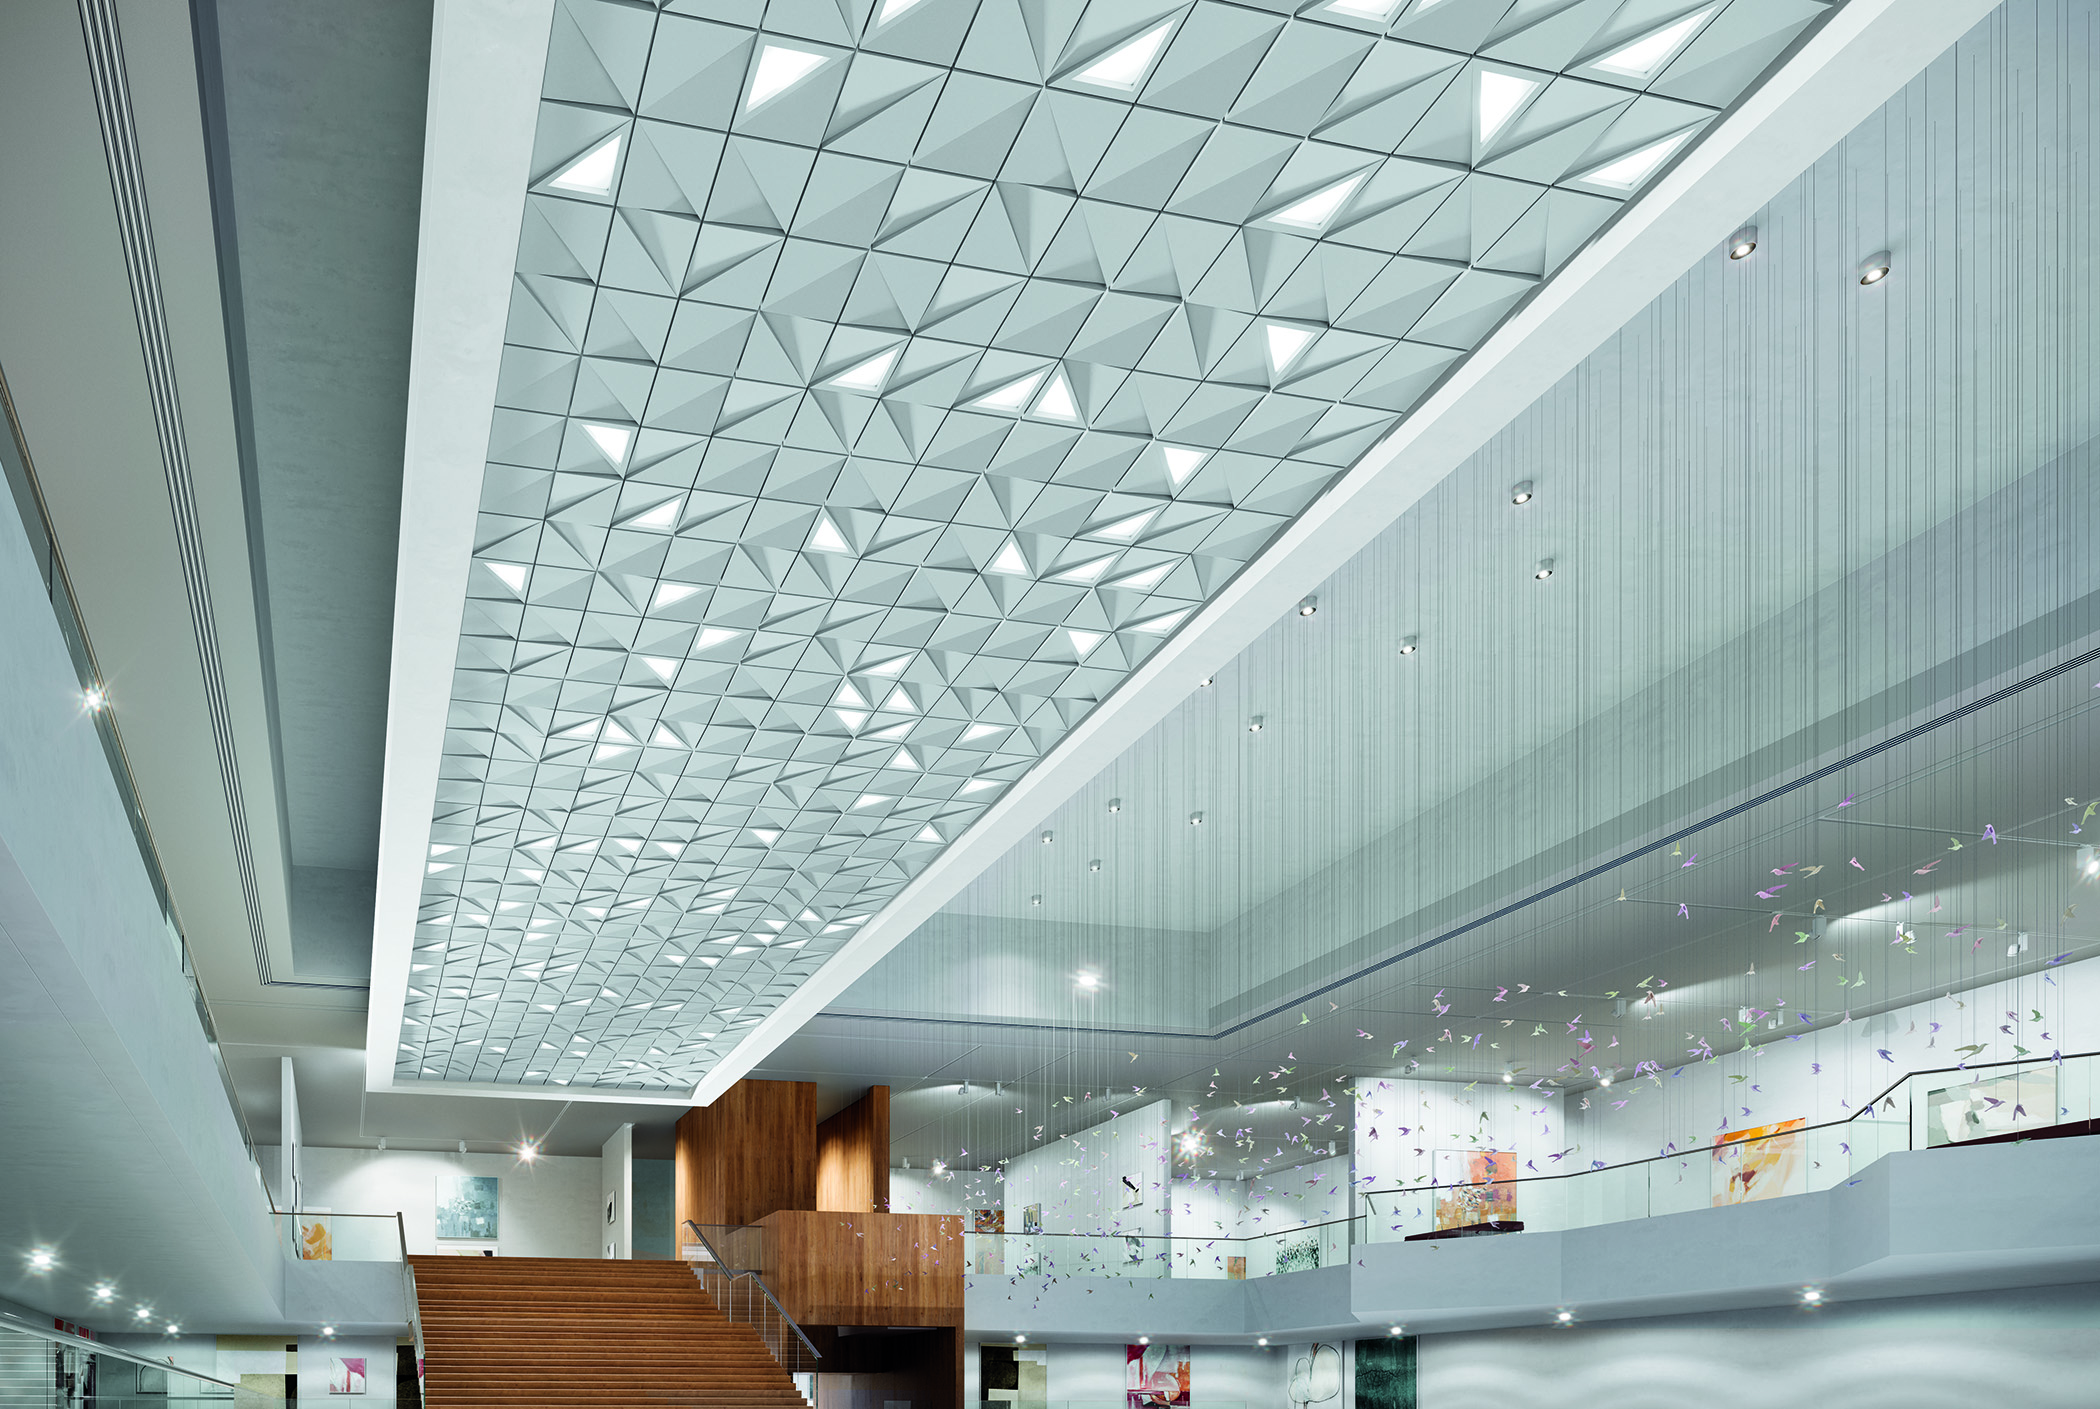 SUPRAFINE XL 9/16  Armstrong Ceiling Solutions – Commercial